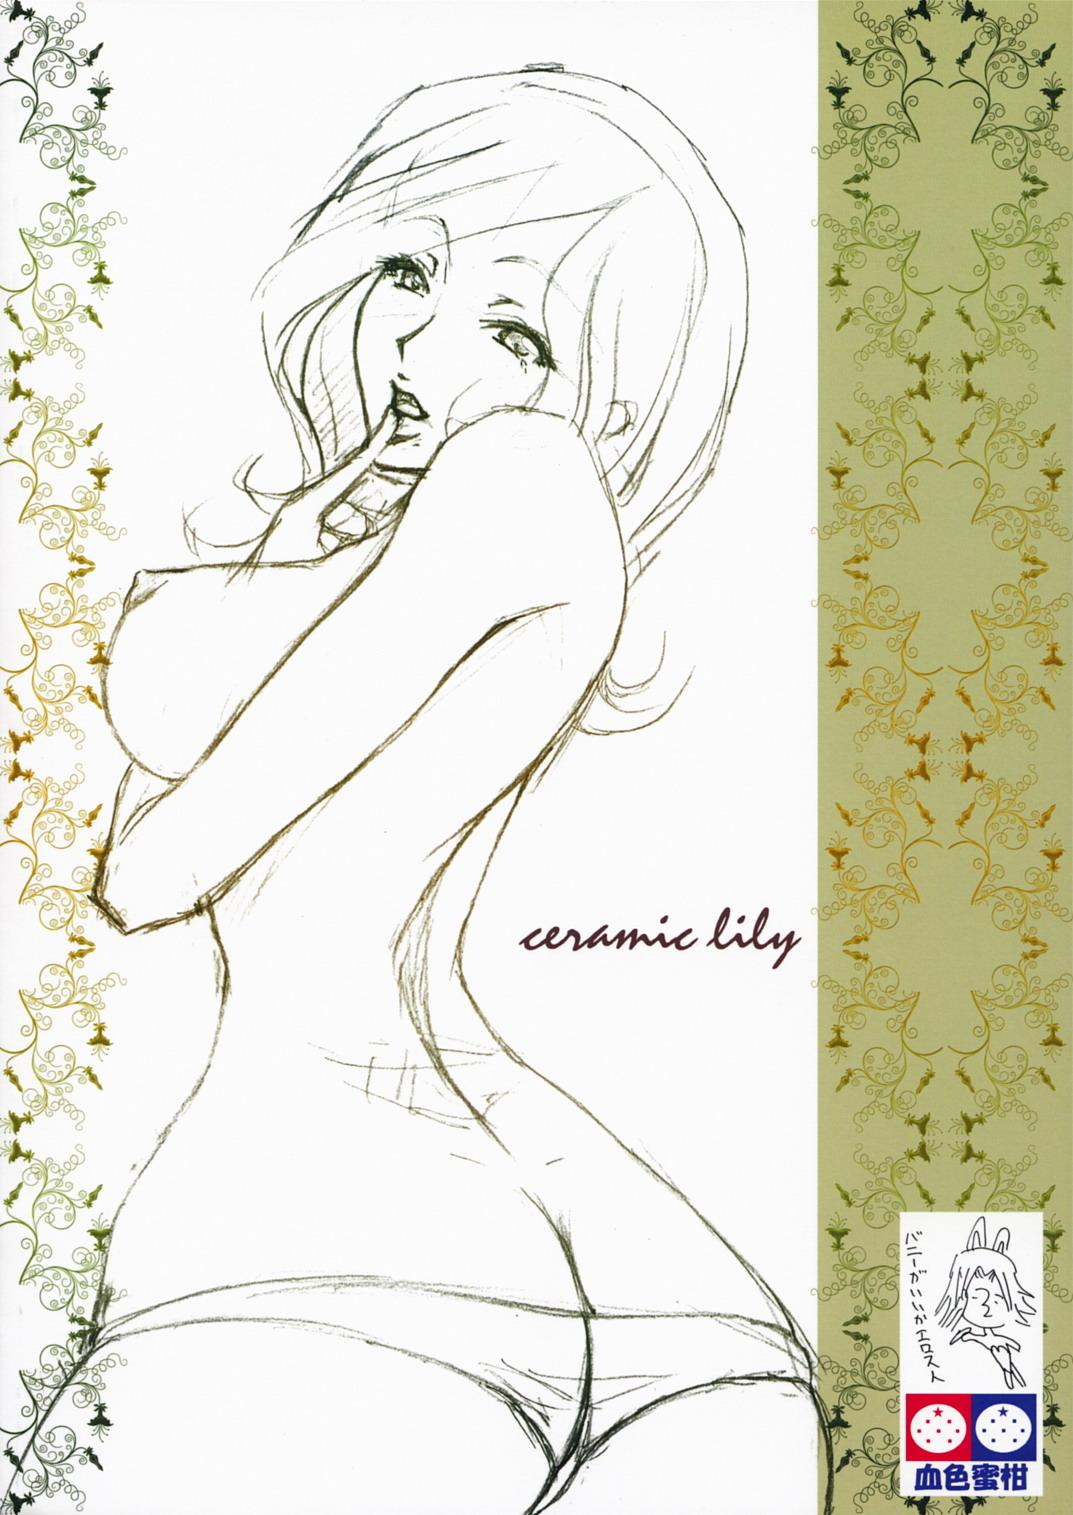 Gets CERAMIC LILY - Code geass Sister - Page 34